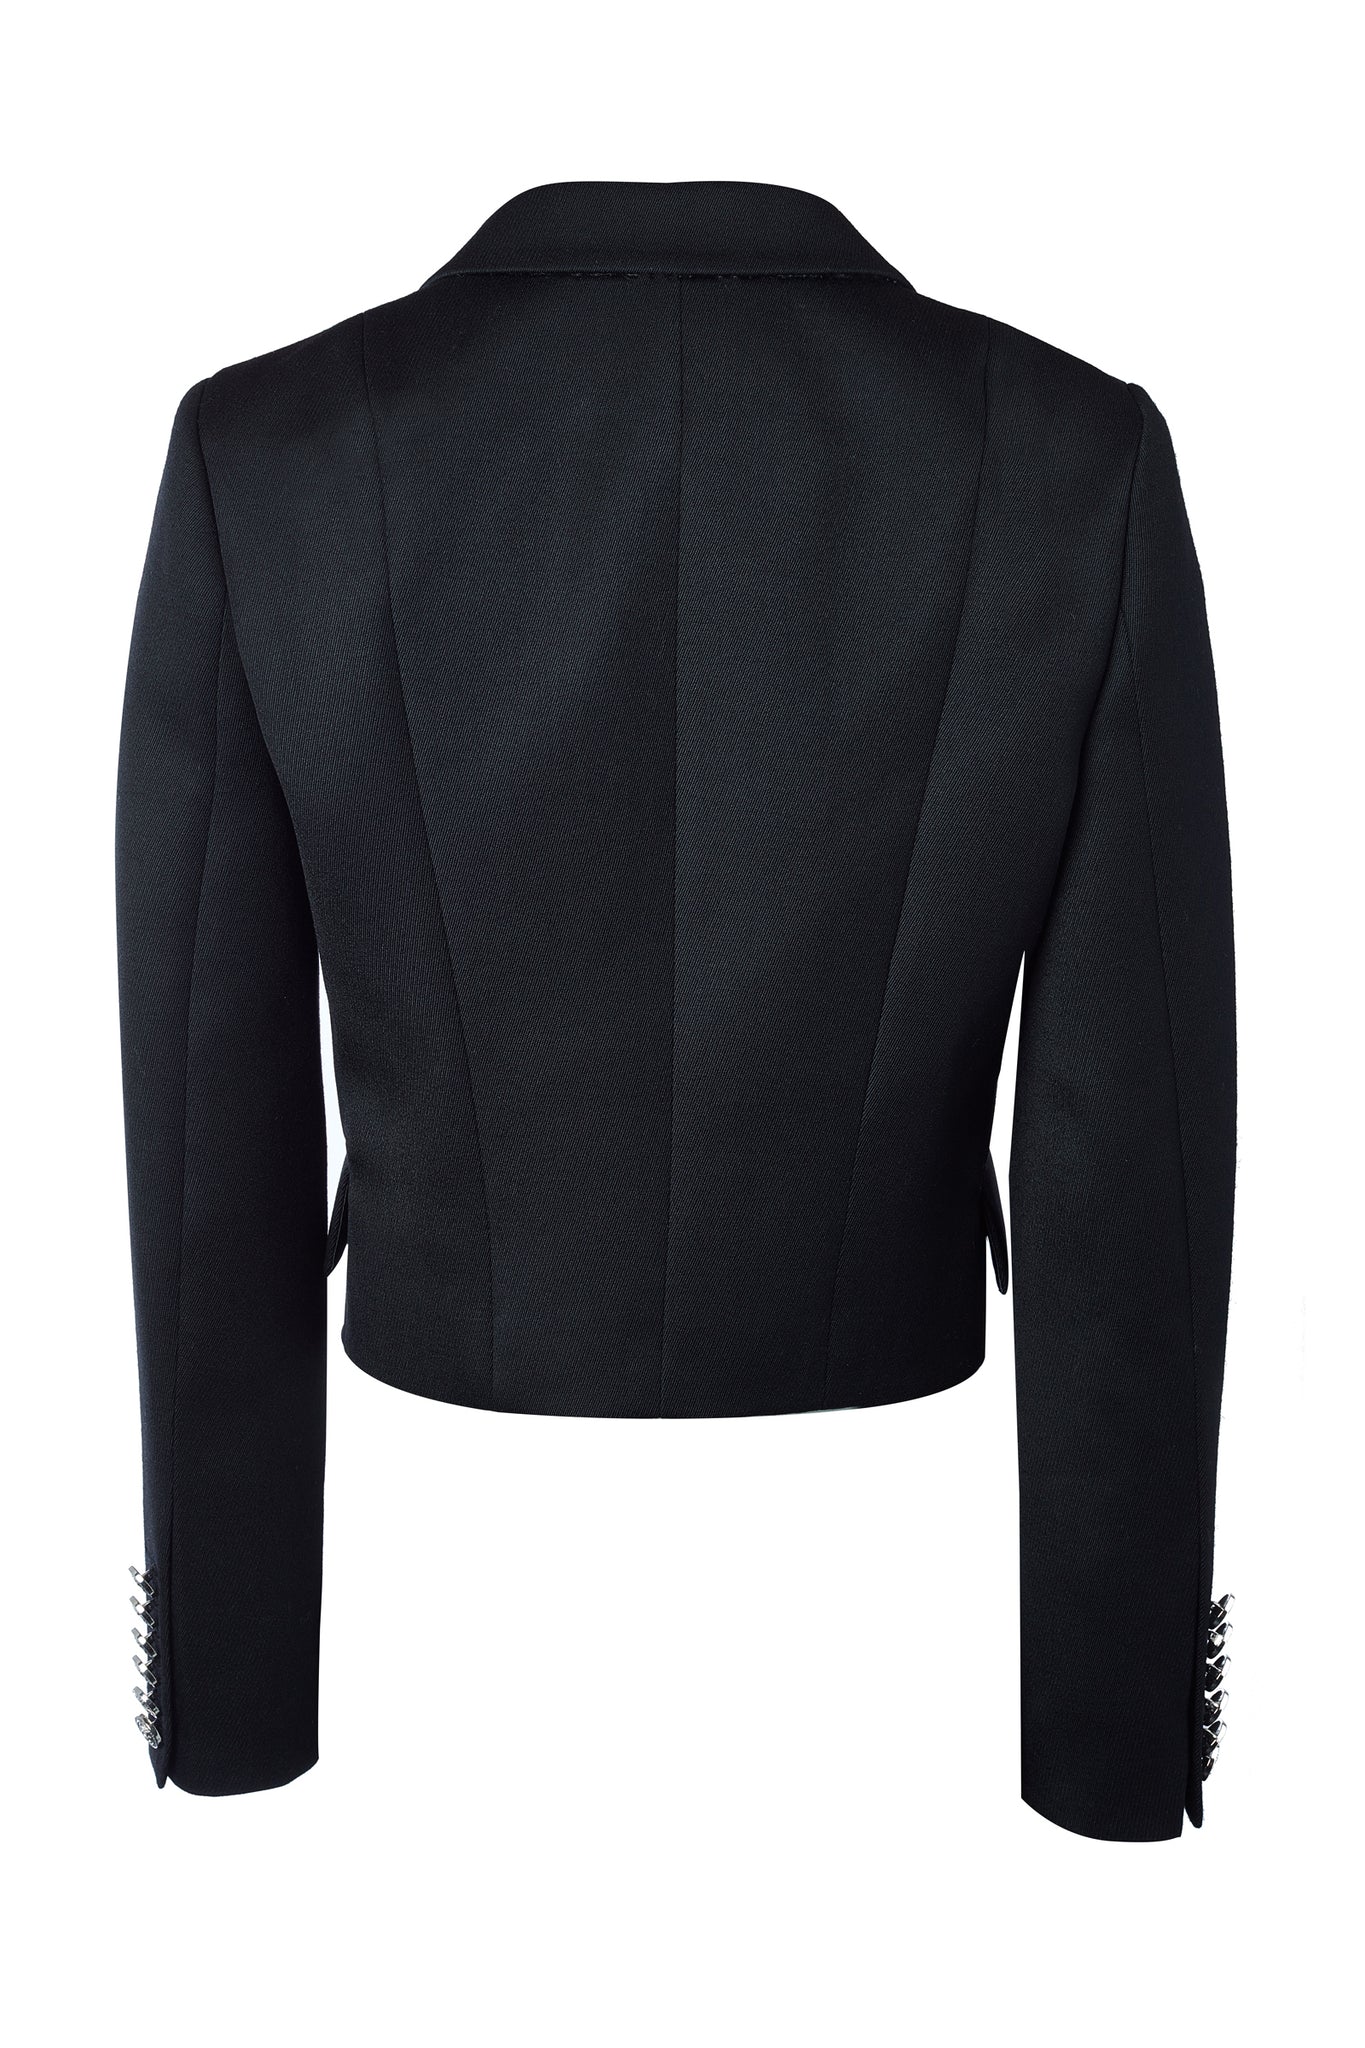 back of British made tailored cropped jacket in black with welt pockets and gold button detail down the front and on sleeves